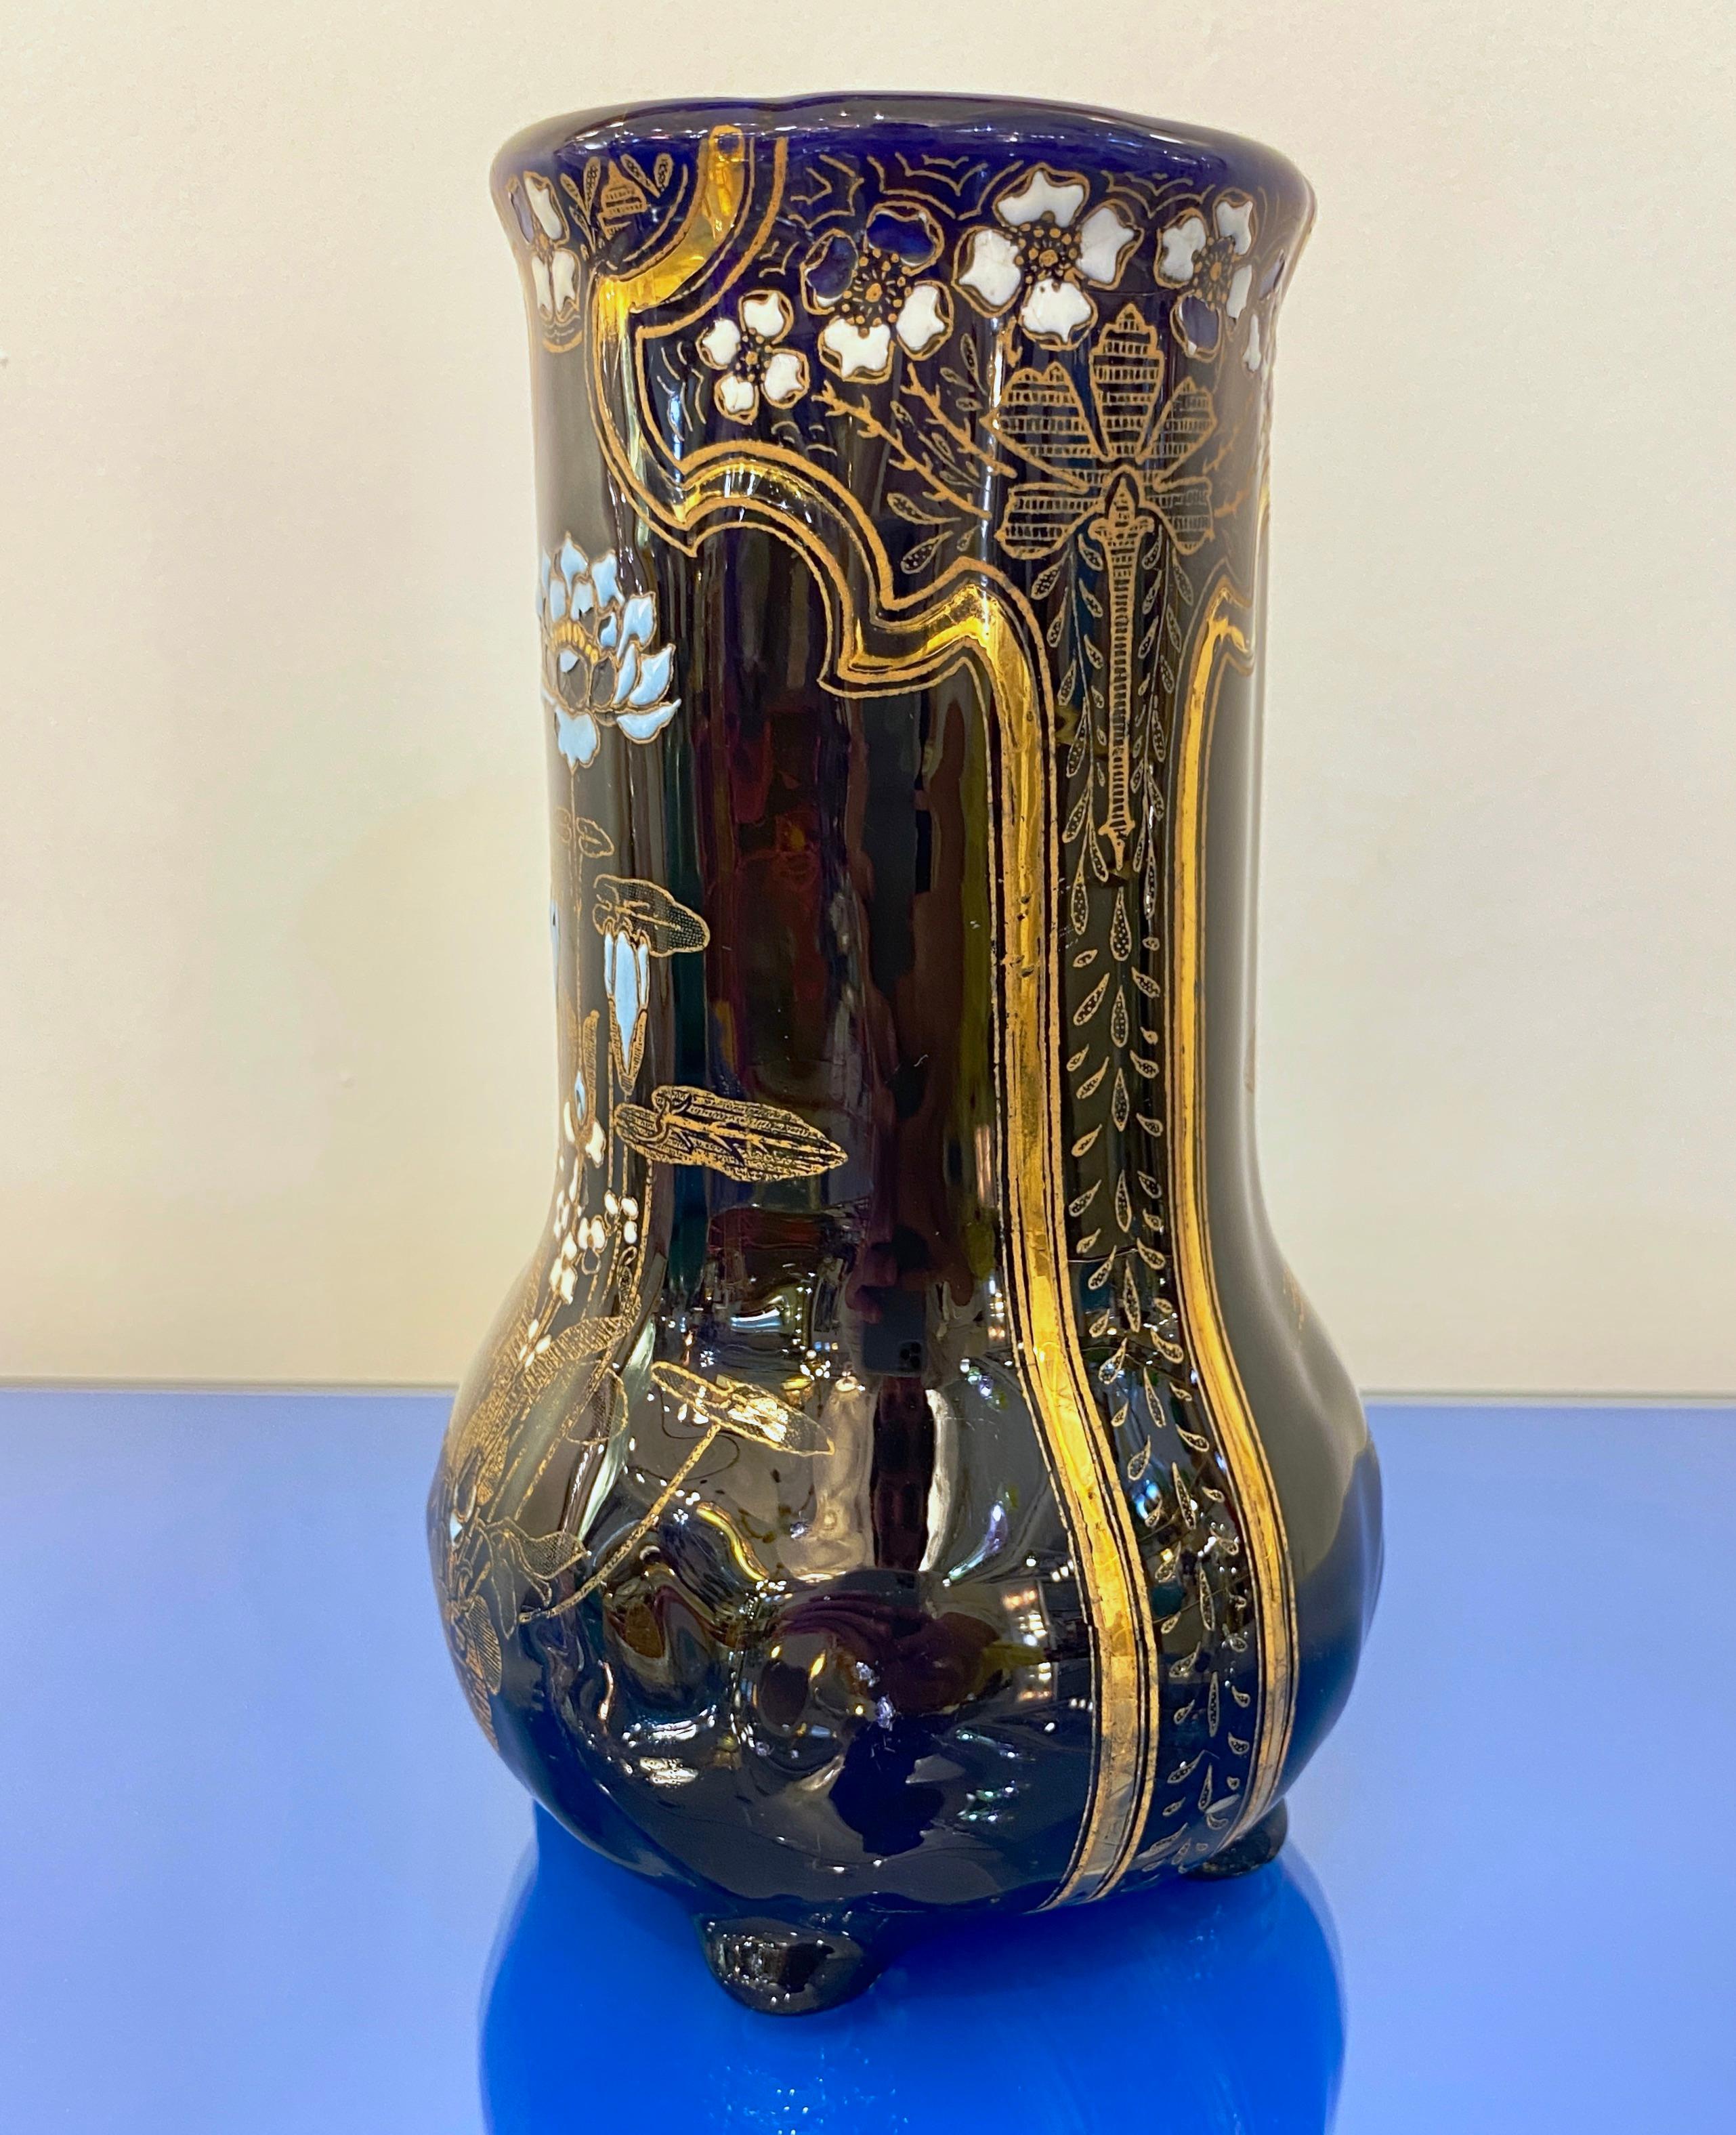 1900-1910 French Art Nouveau Earthenware Vase in faience by Keller & Guérin - Lunéville, raised on 4 feet and decorated with hand-painted flowers enameled in white and azure sky blue amongst a hand-painted gilt flower decor of water lilies, gold